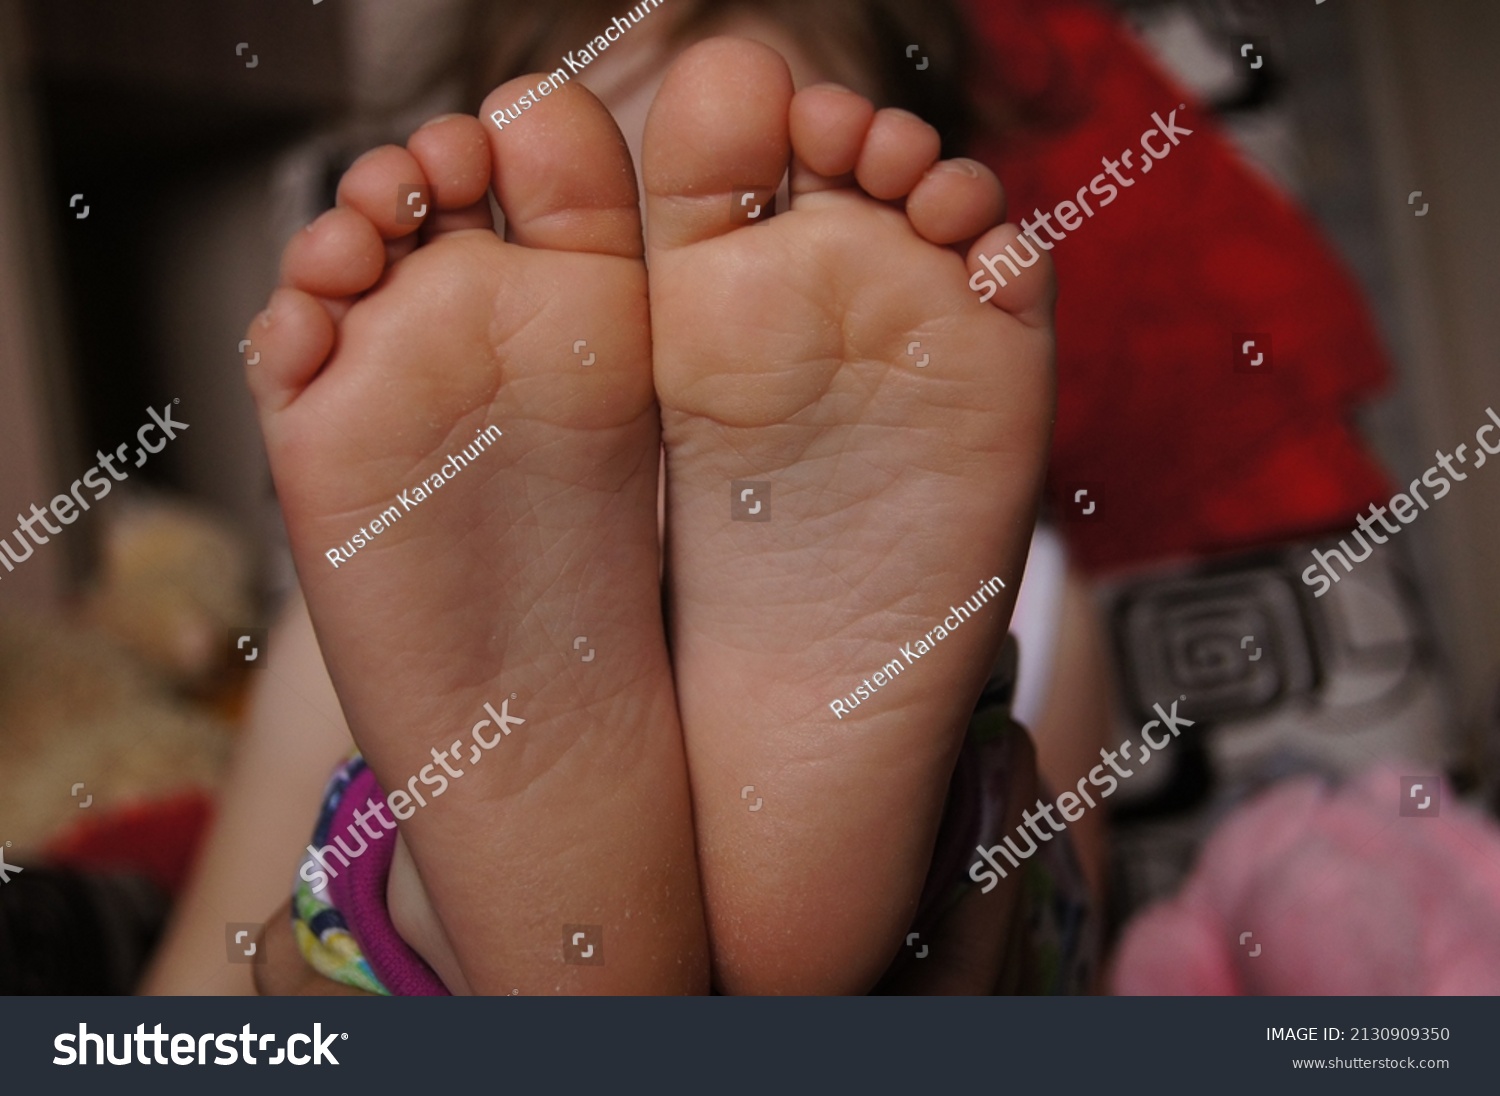 Stock Photo Close Up Of A Baby S Feet 2130909350 